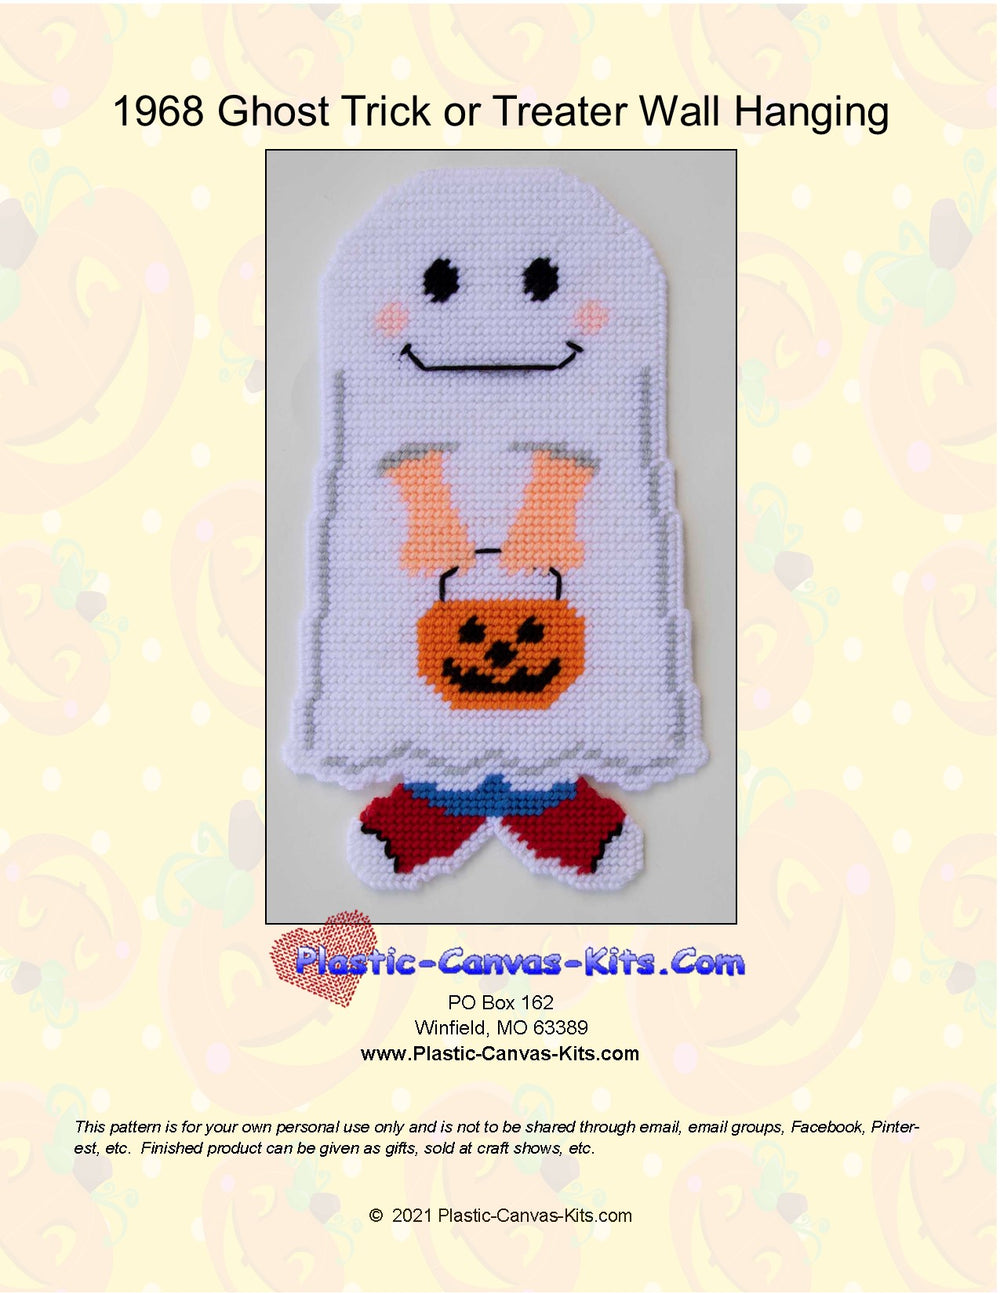 Ghost Trick or Treater Wall Hanging